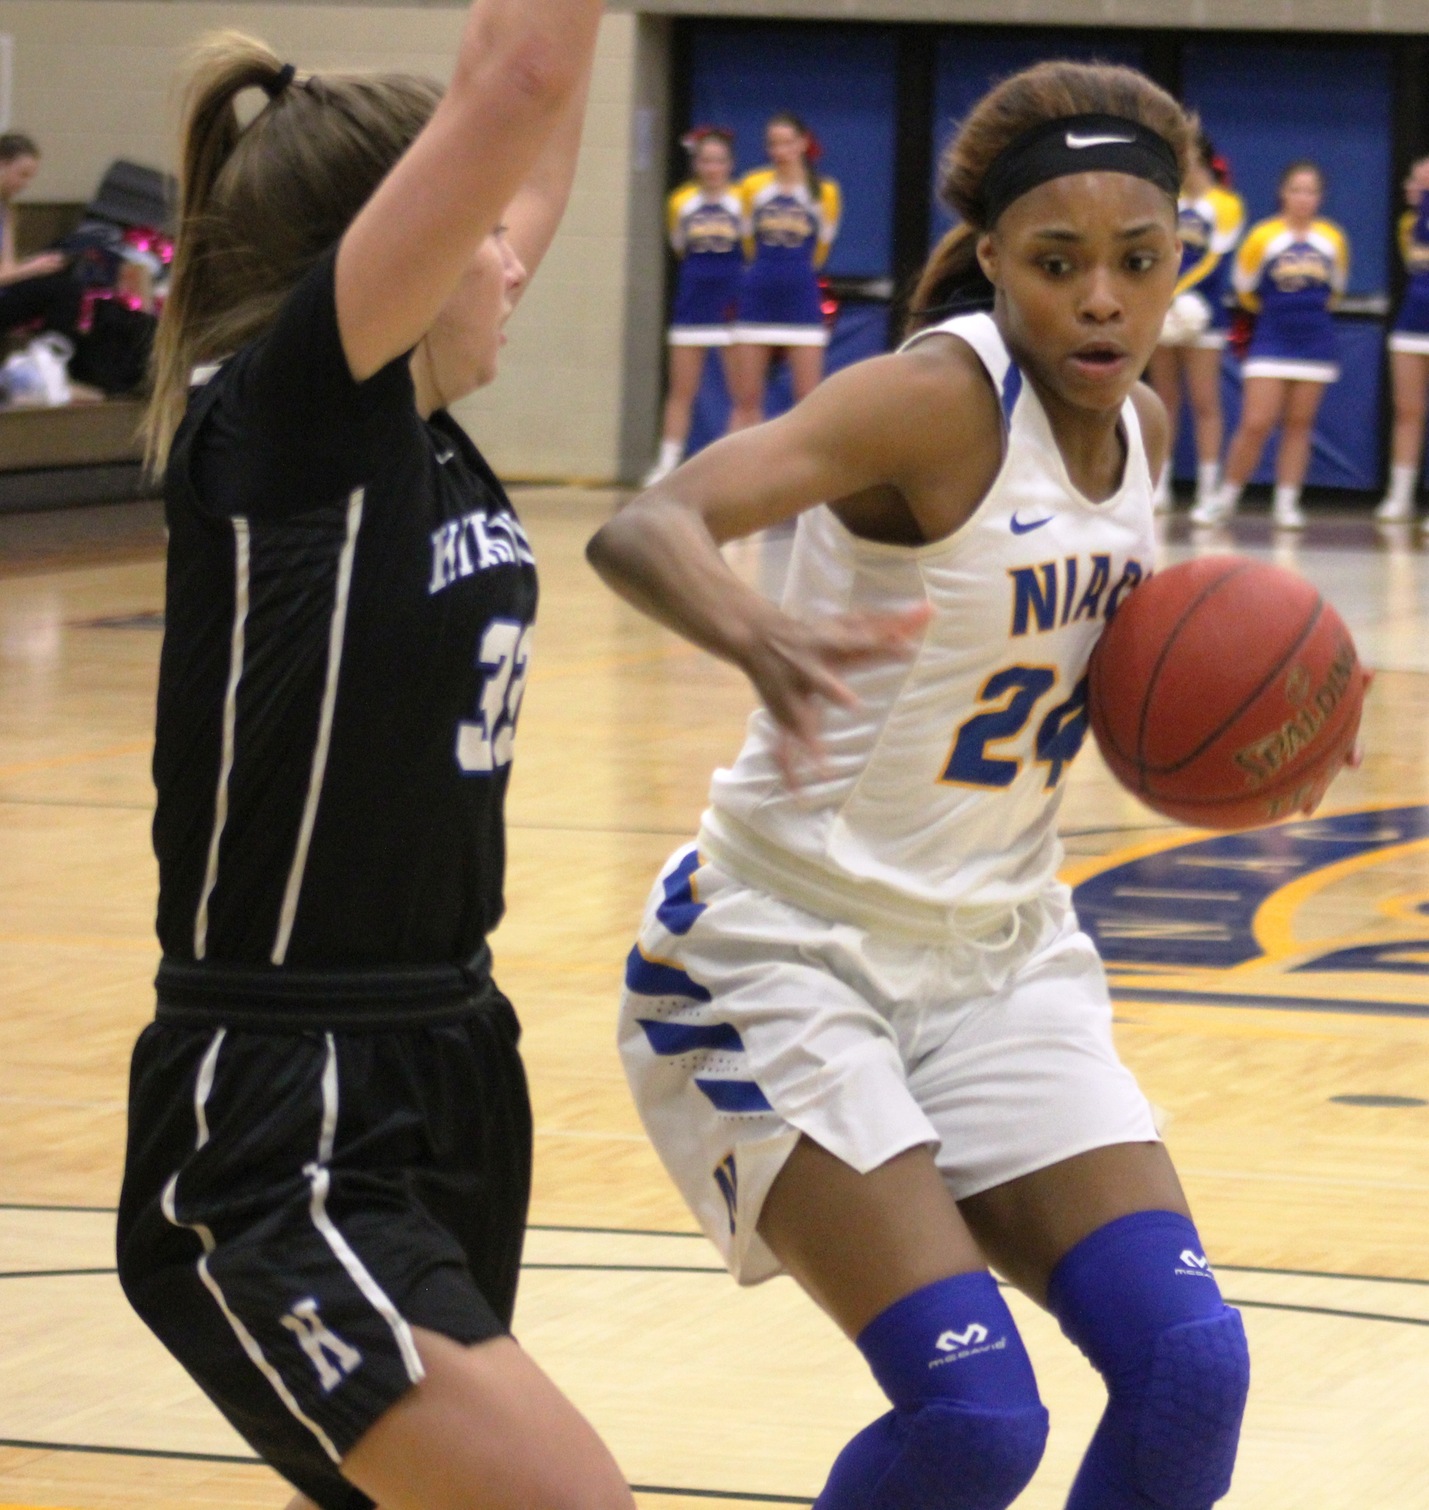 NIACC's Khalilah Holloway drives to the basket during last week's home game against Kirkwood.